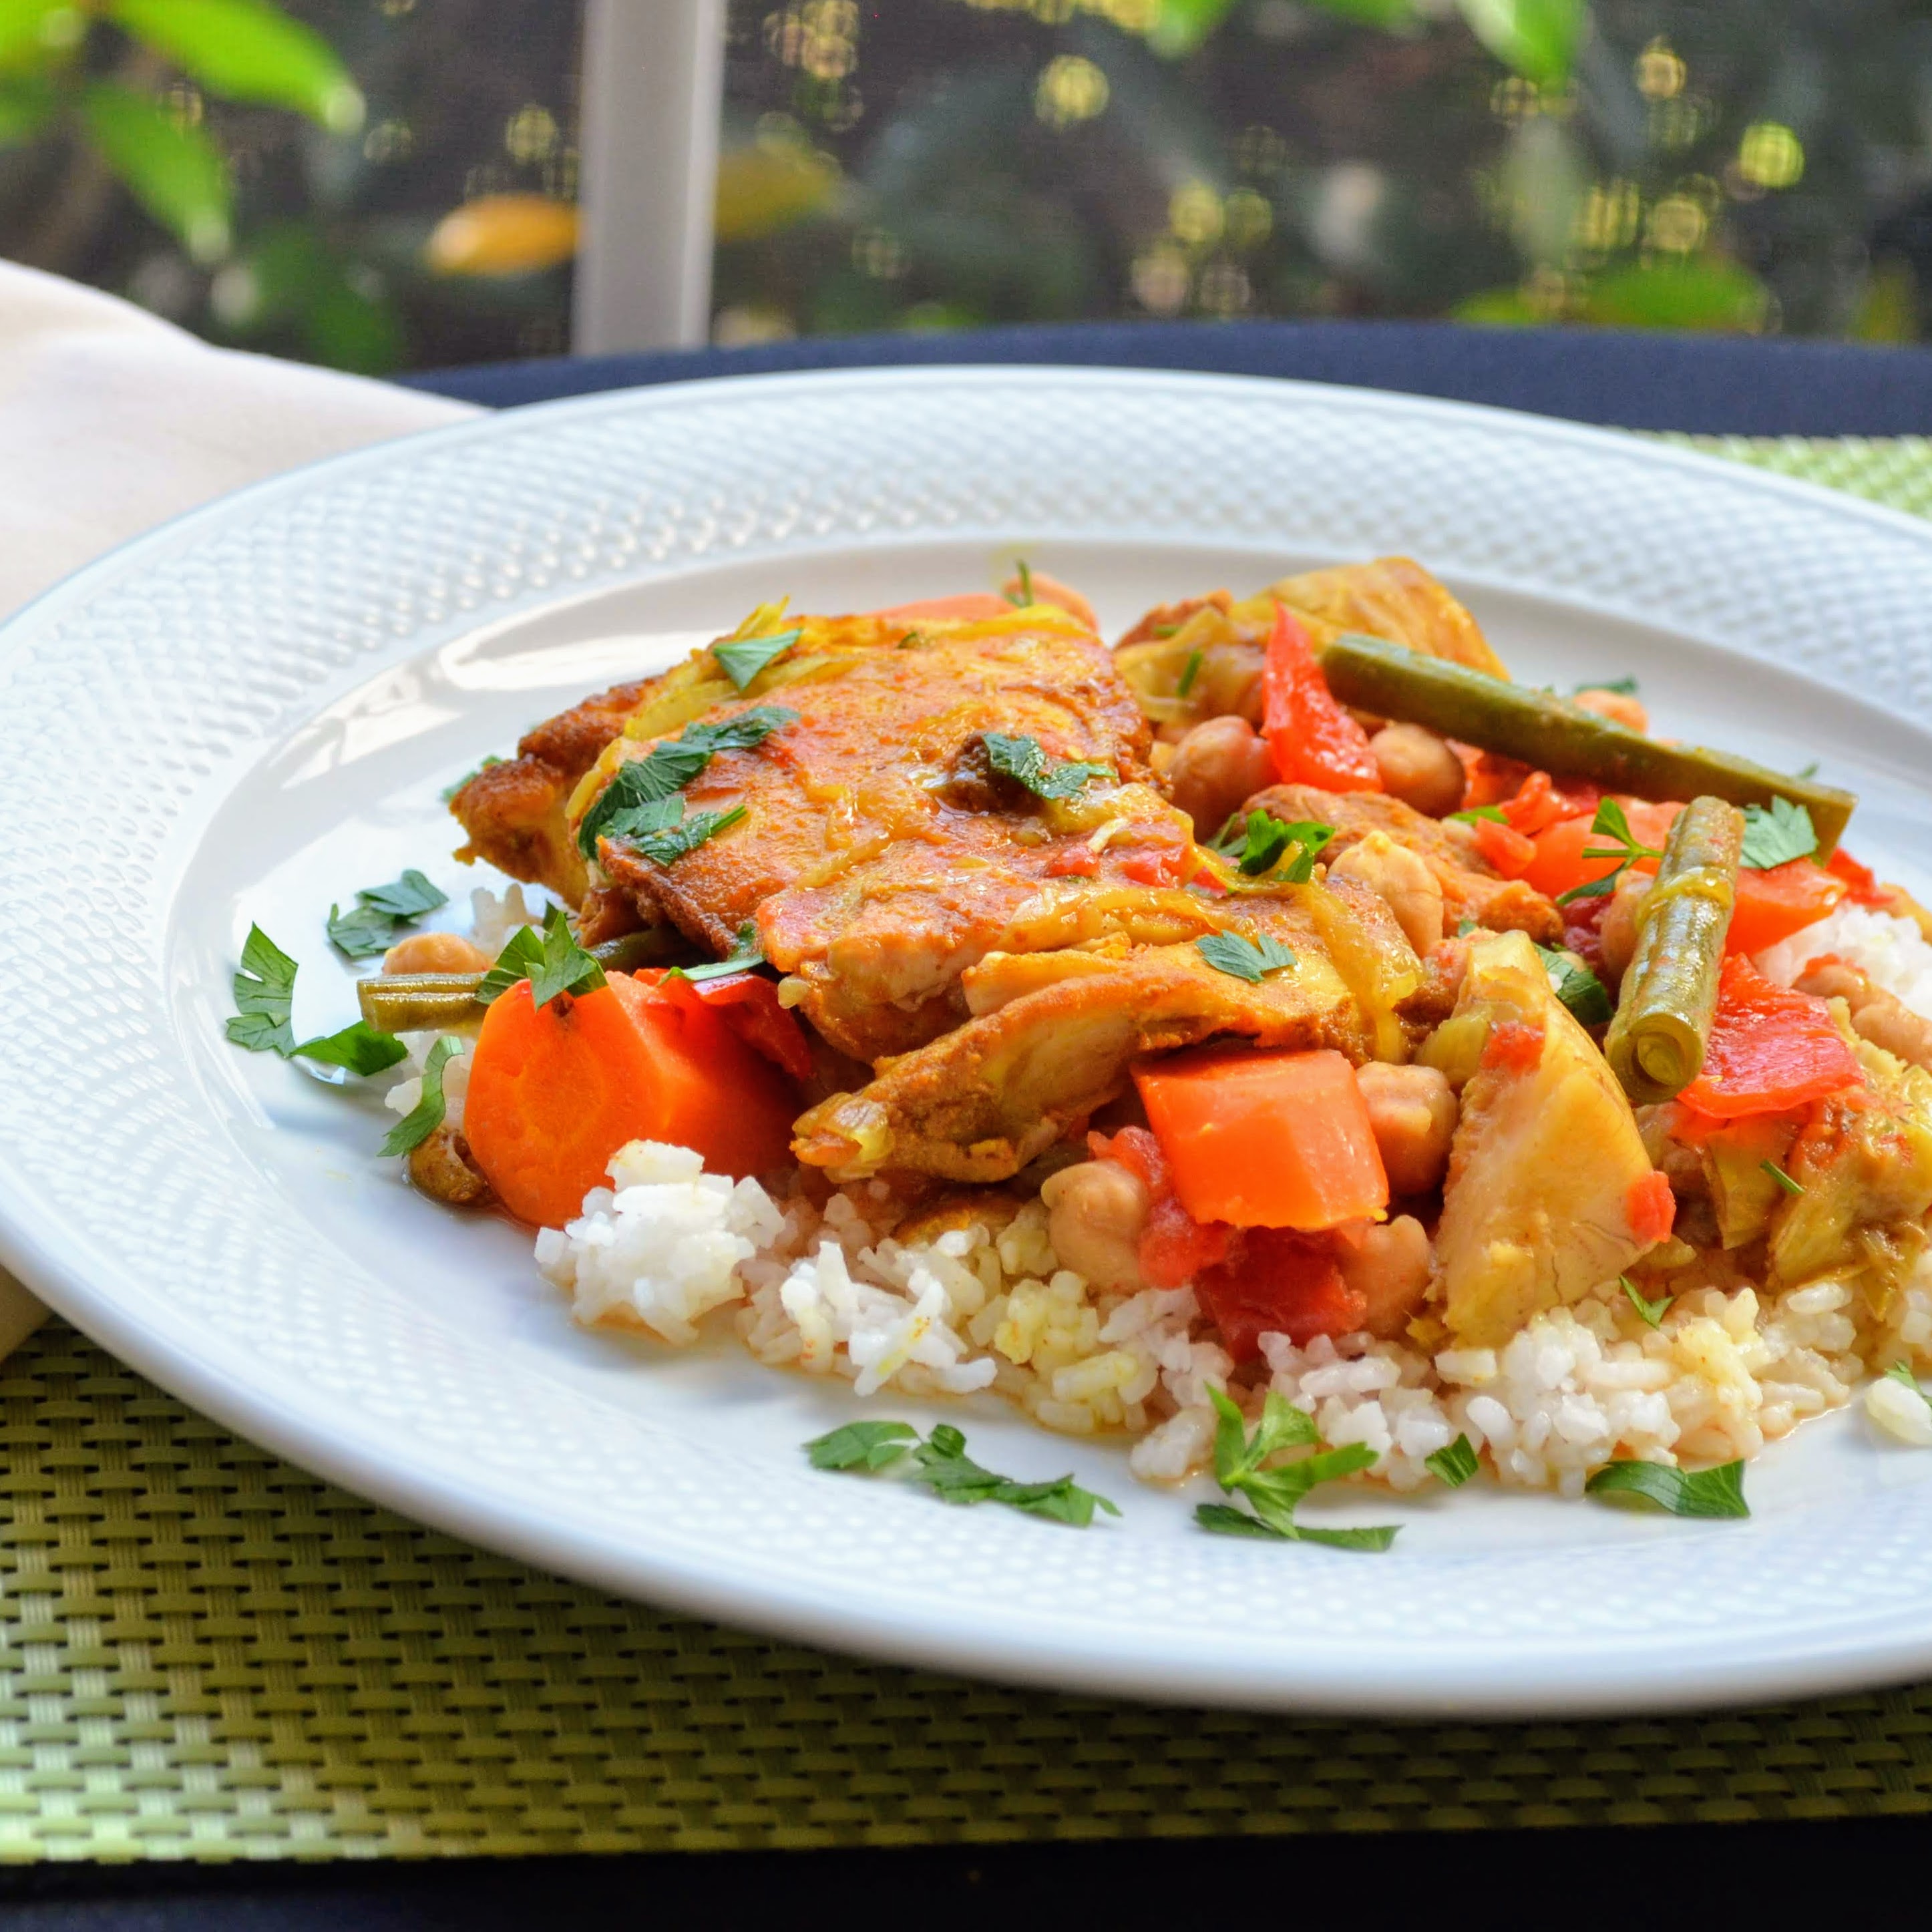 <p>"This delicious slow cooker meal of chicken and vegetables pairs up nicely with couscous and pita bread," says DEBMCE4.</p>
                          